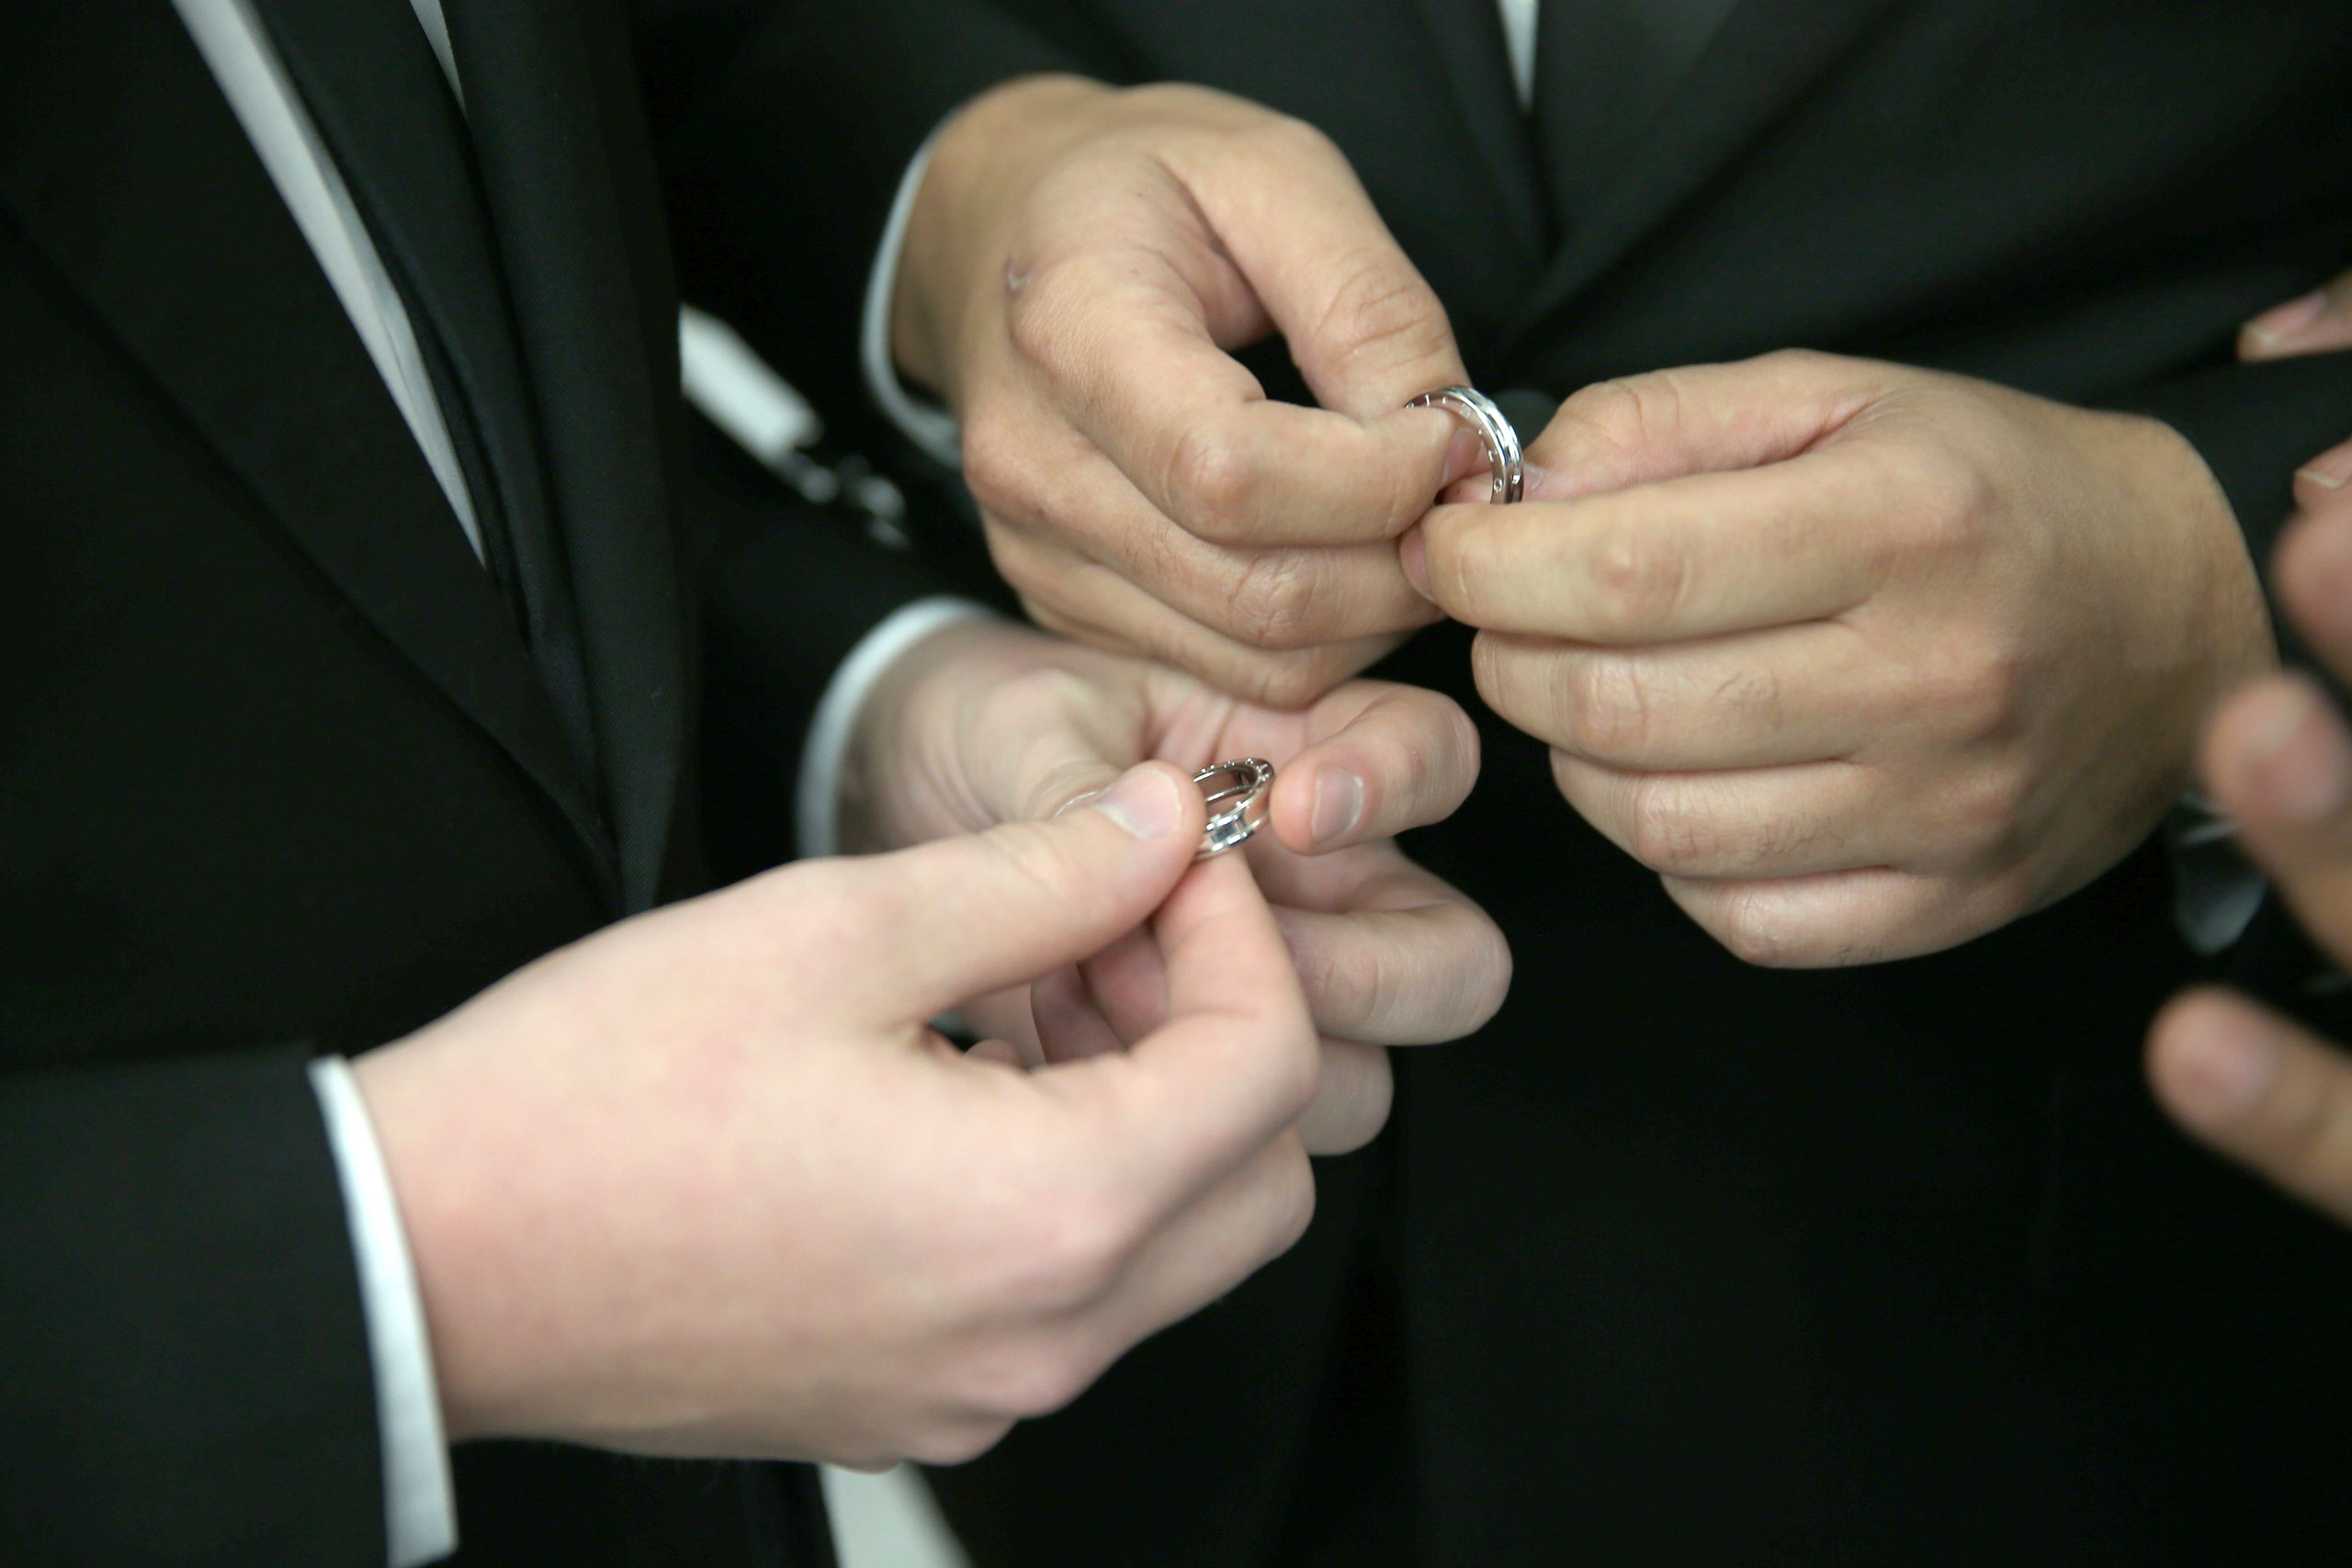 A couple exchange rings as they are wed during a wedding ceremony at the Broward County Courthouse on Jan. 6, 2015 in Fort Lauderdale, Fla (Joe Raedle—Getty Images)